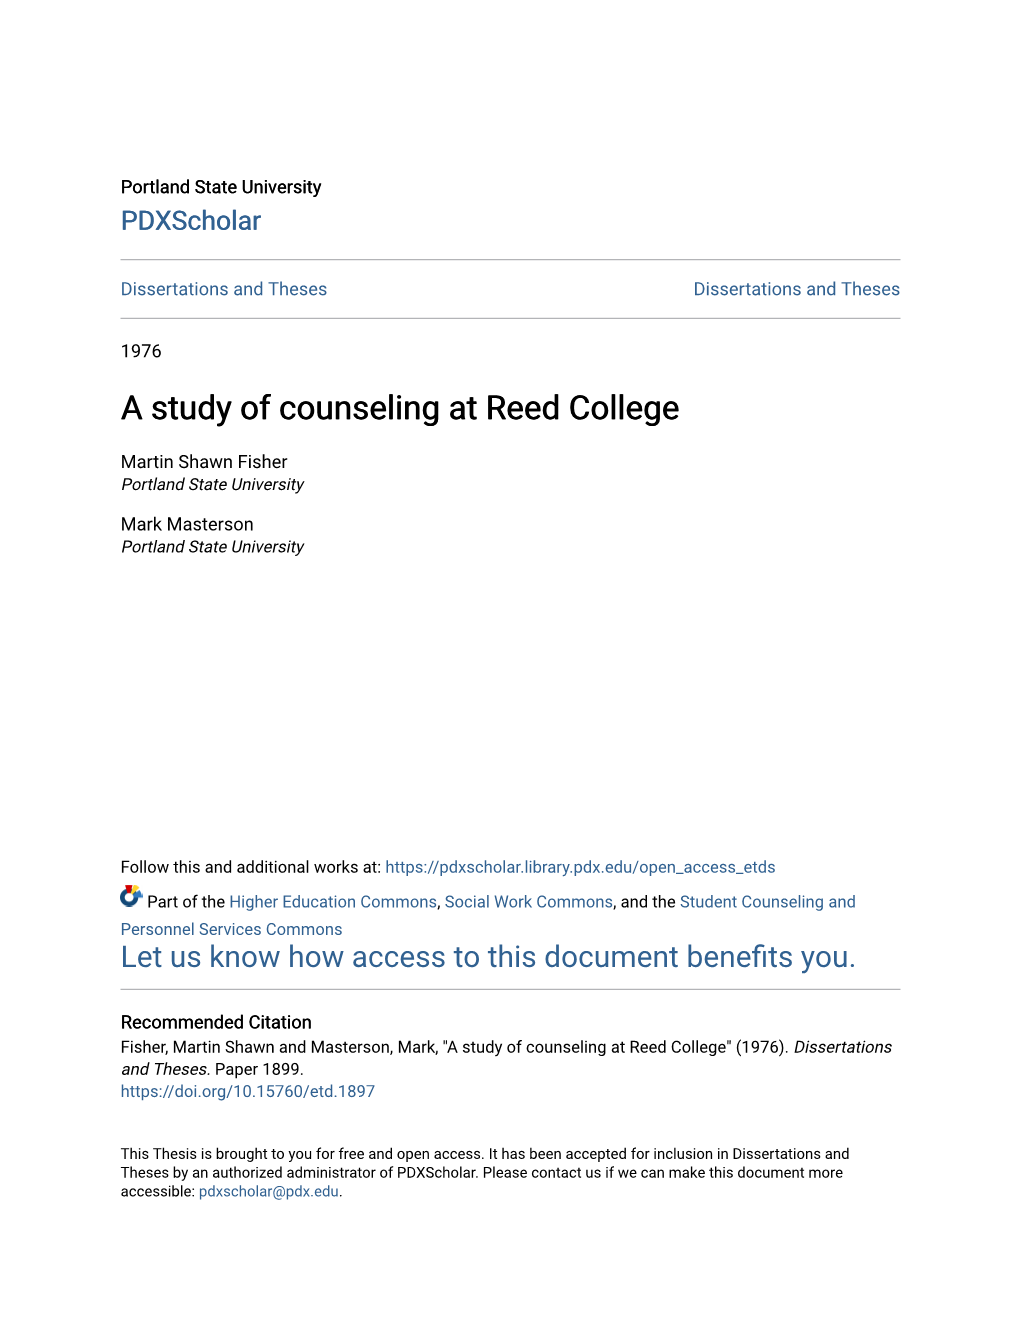 A Study of Counseling at Reed College